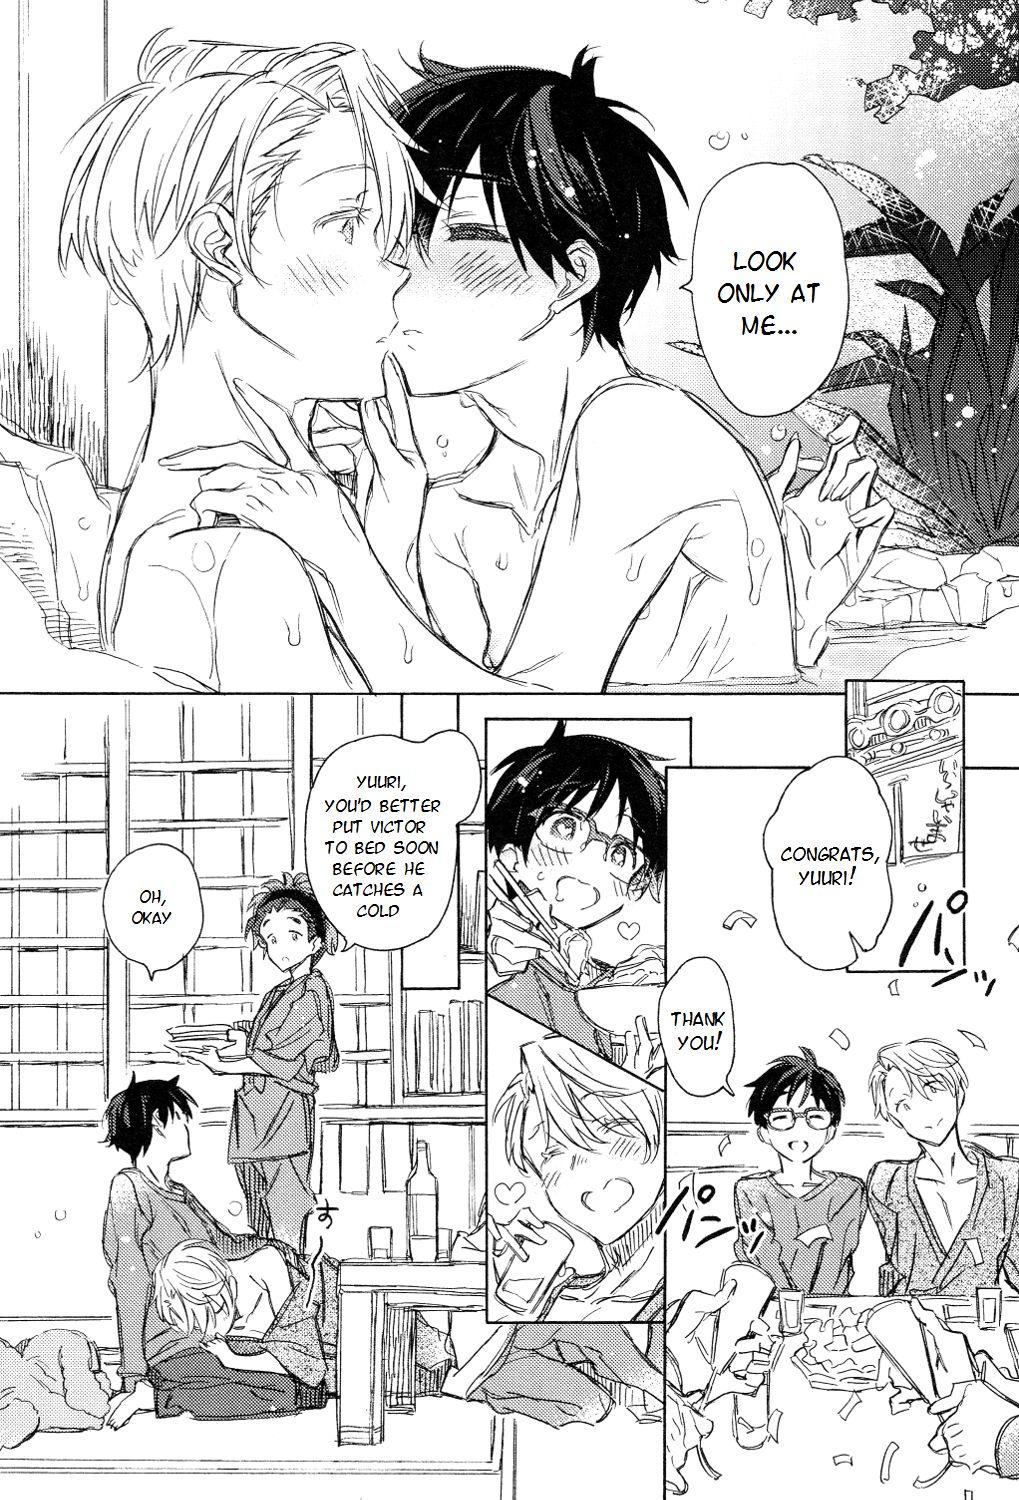 Sex Toy BRAND NEW DAY,BRAND NEW LIFE - Yuri on ice Magrinha - Page 6